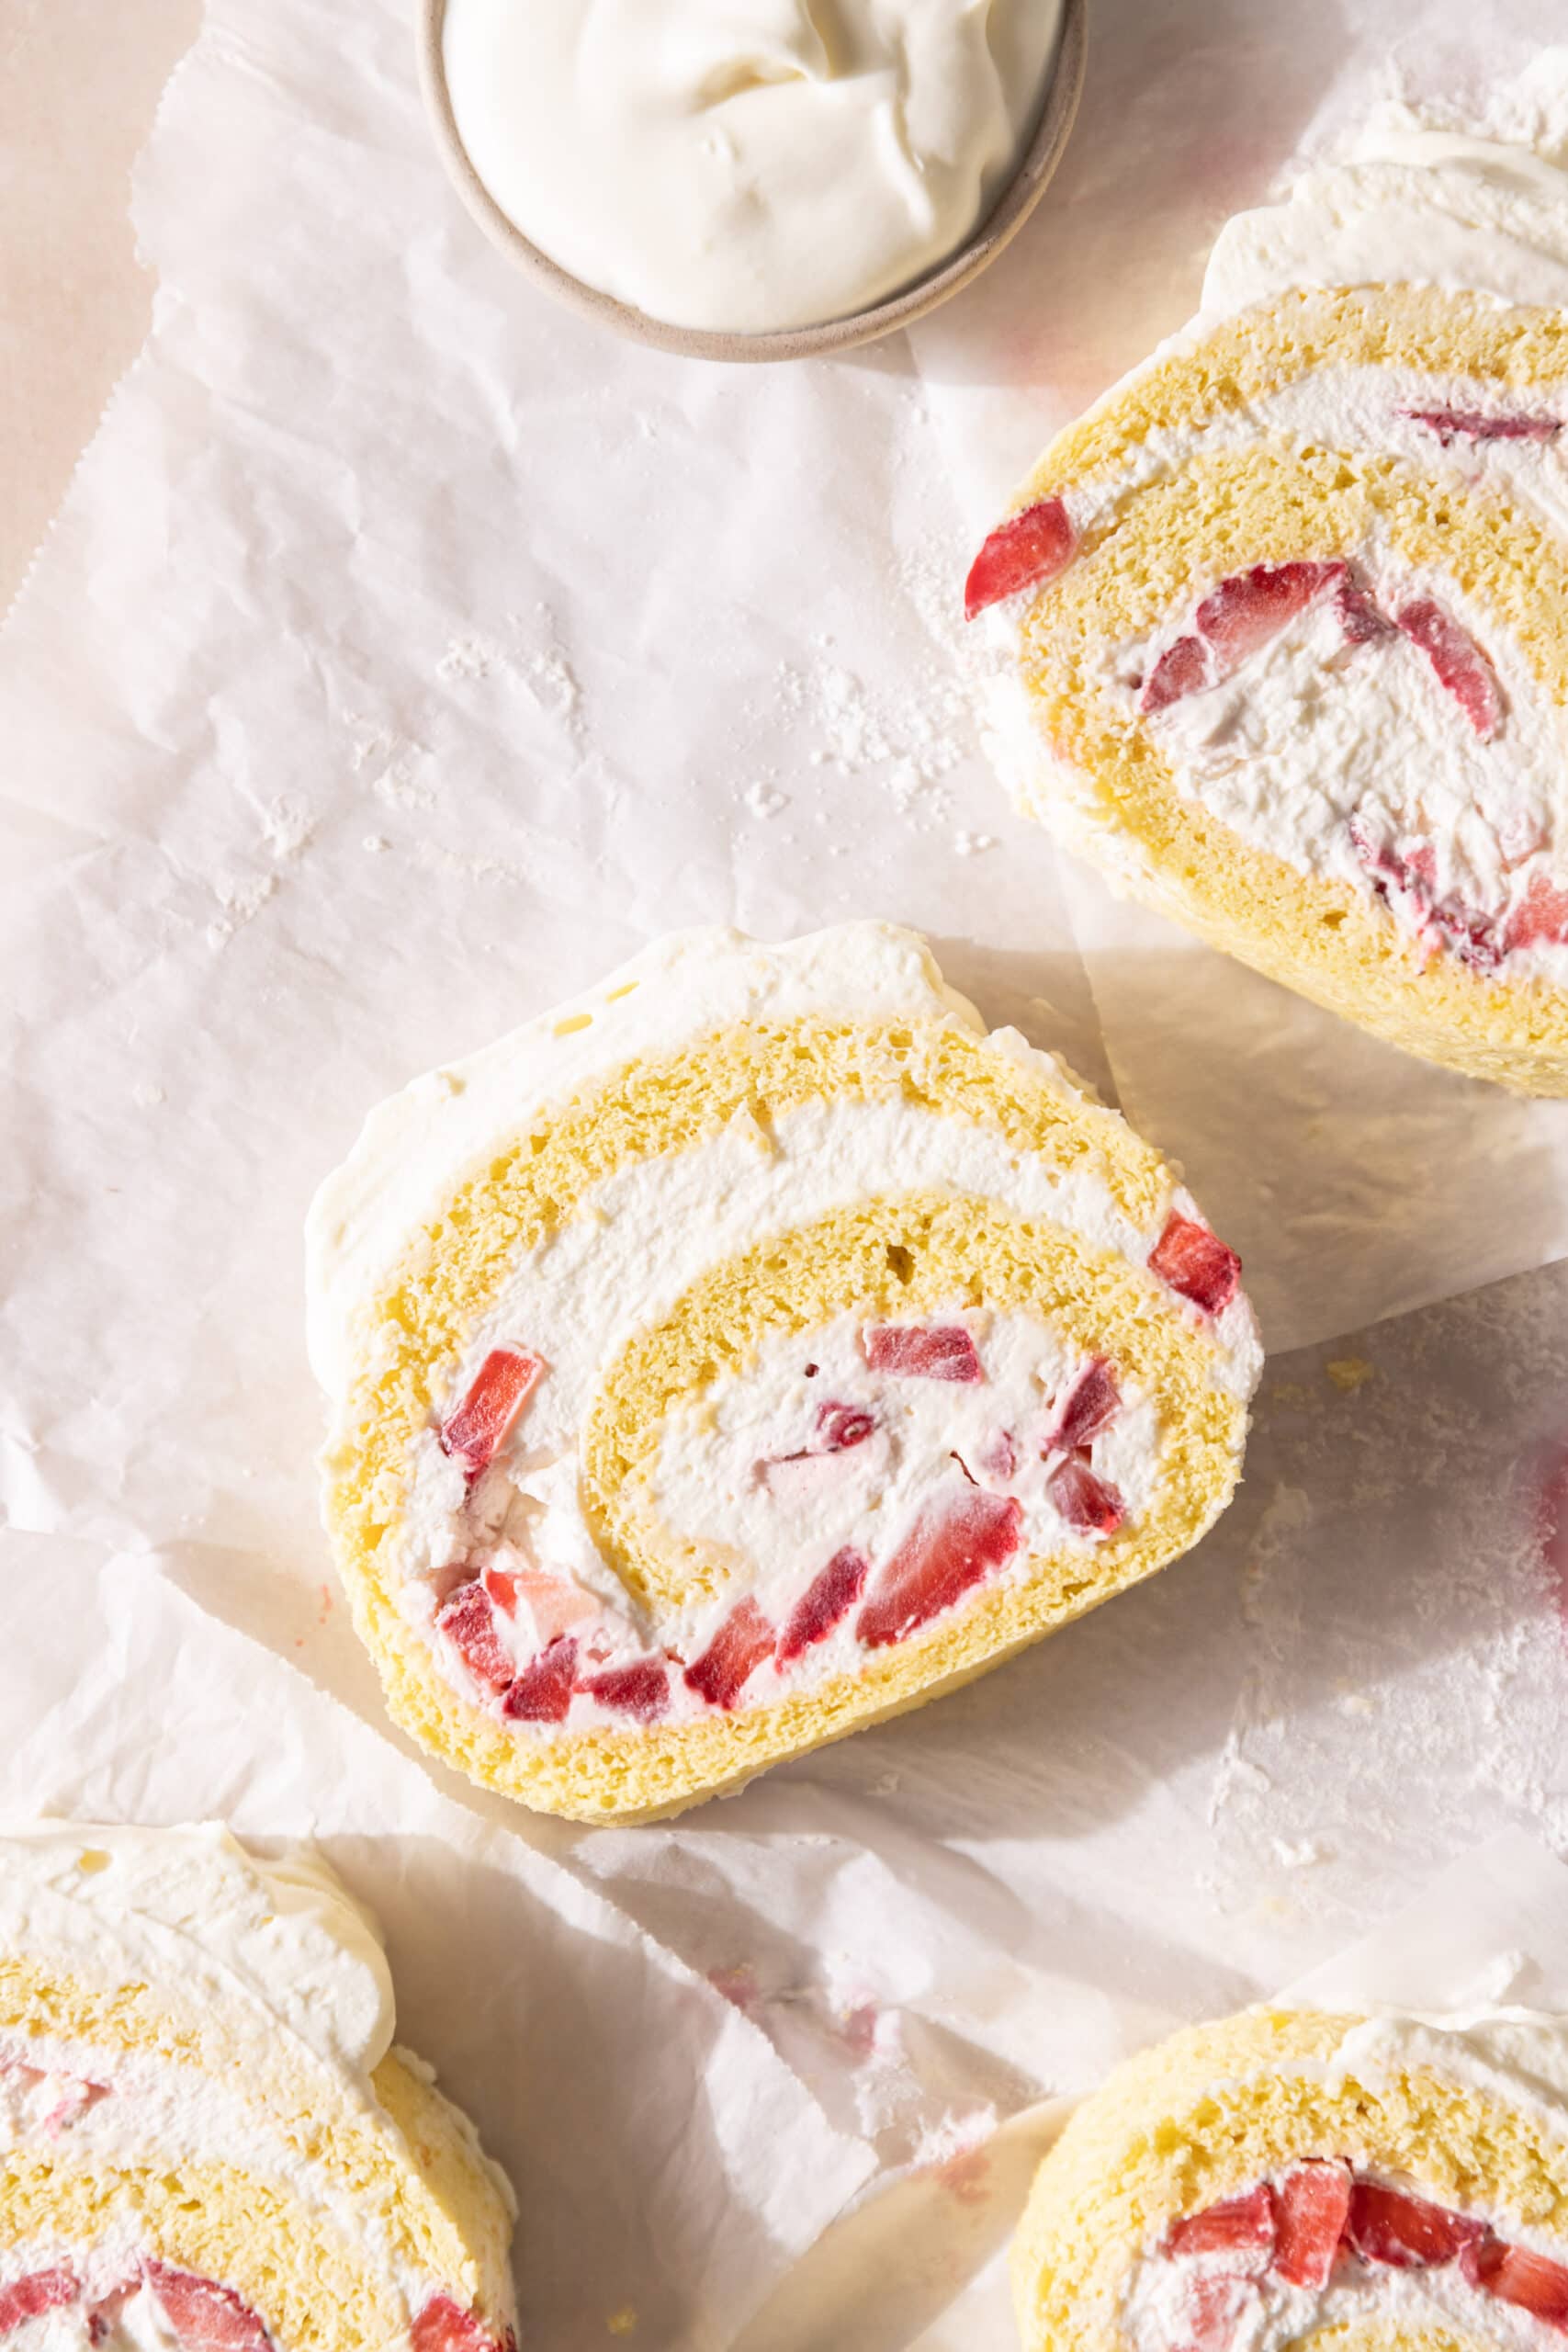 Overhead view of slices of Erdbeerroulade with the whipped cream and strawberries showing. 